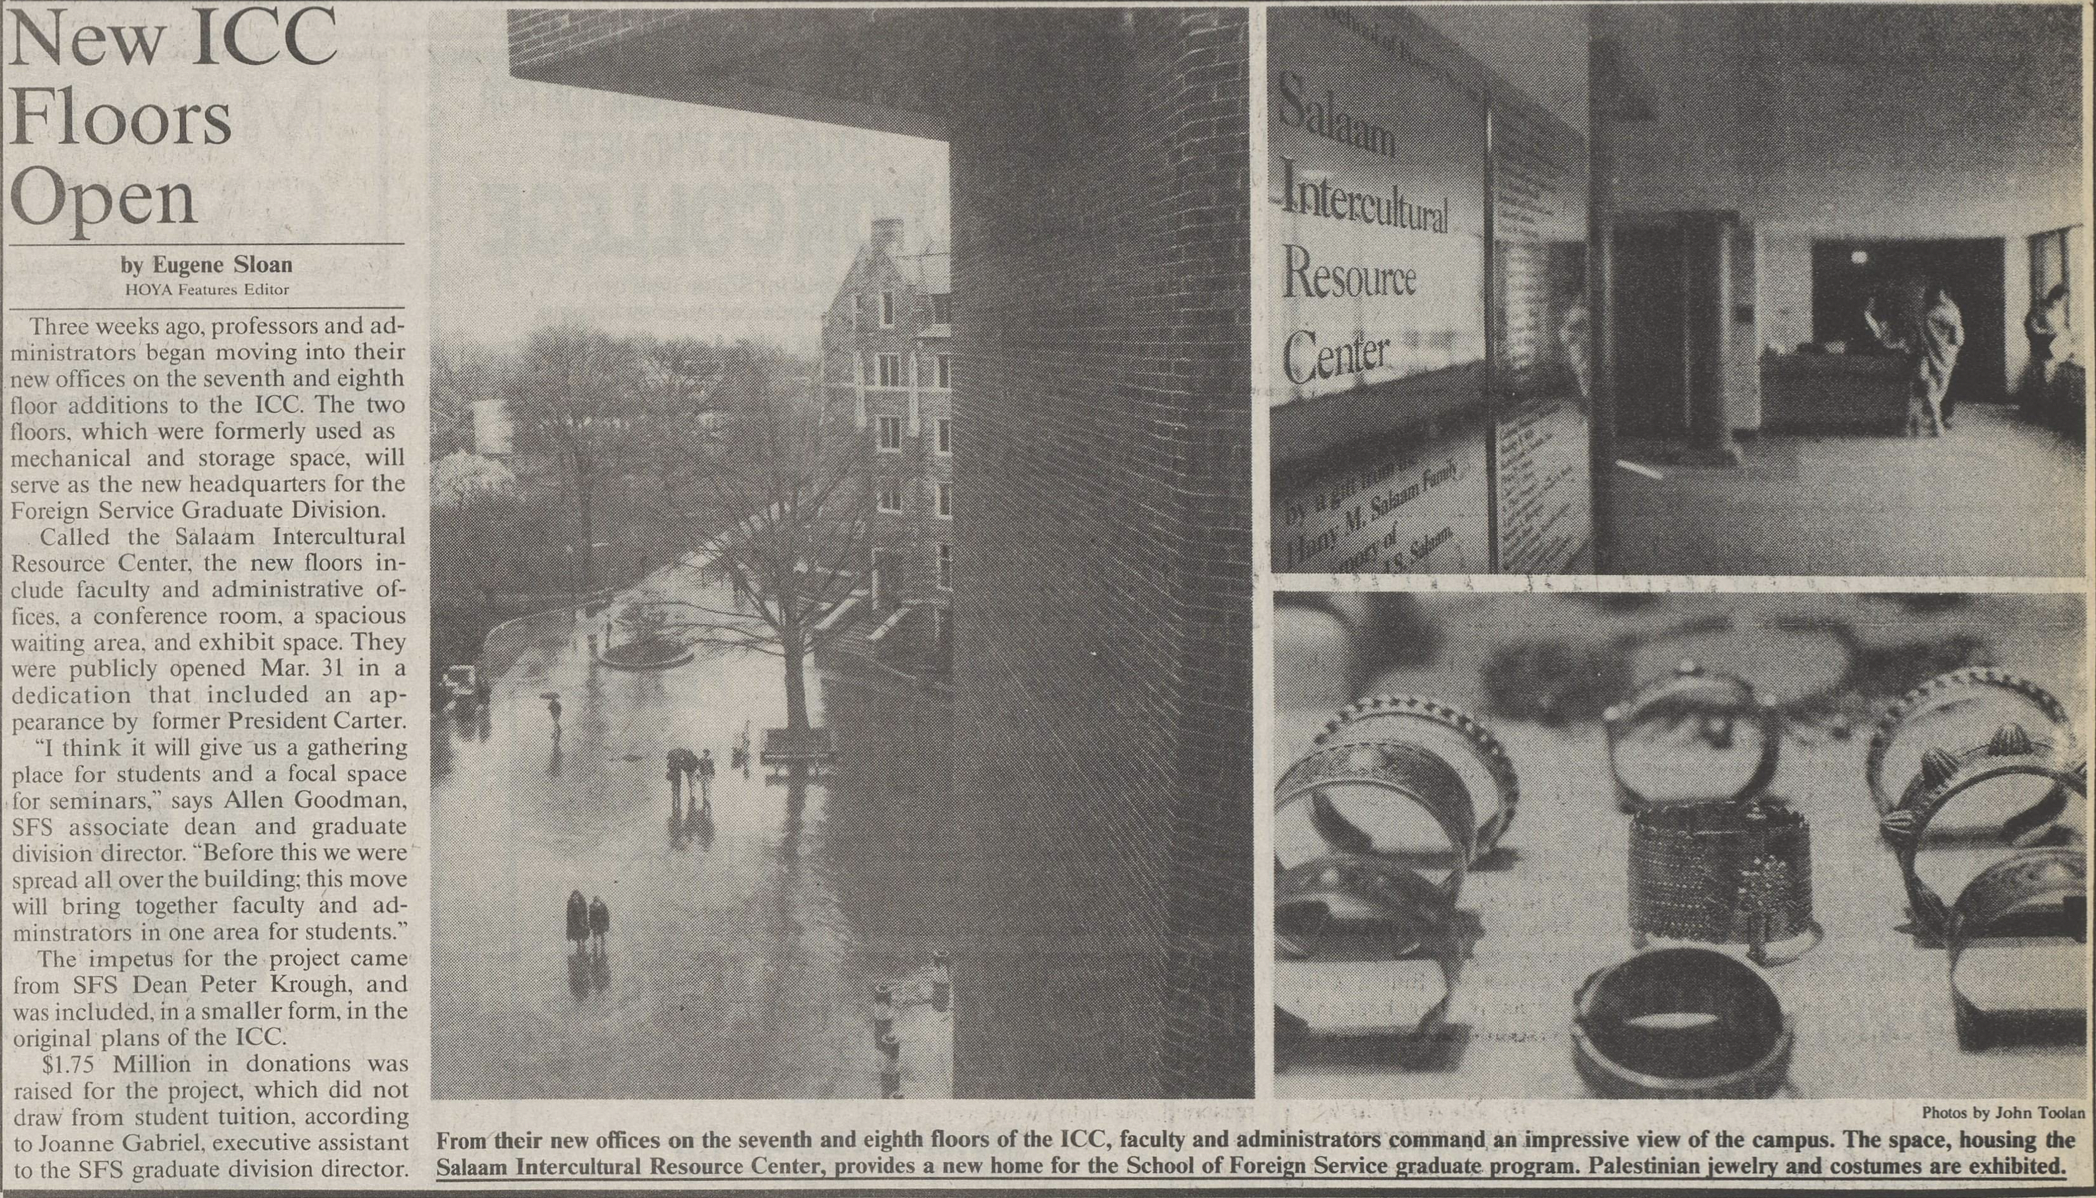 1989 Hoya article about 7th floor of ICC with photos.